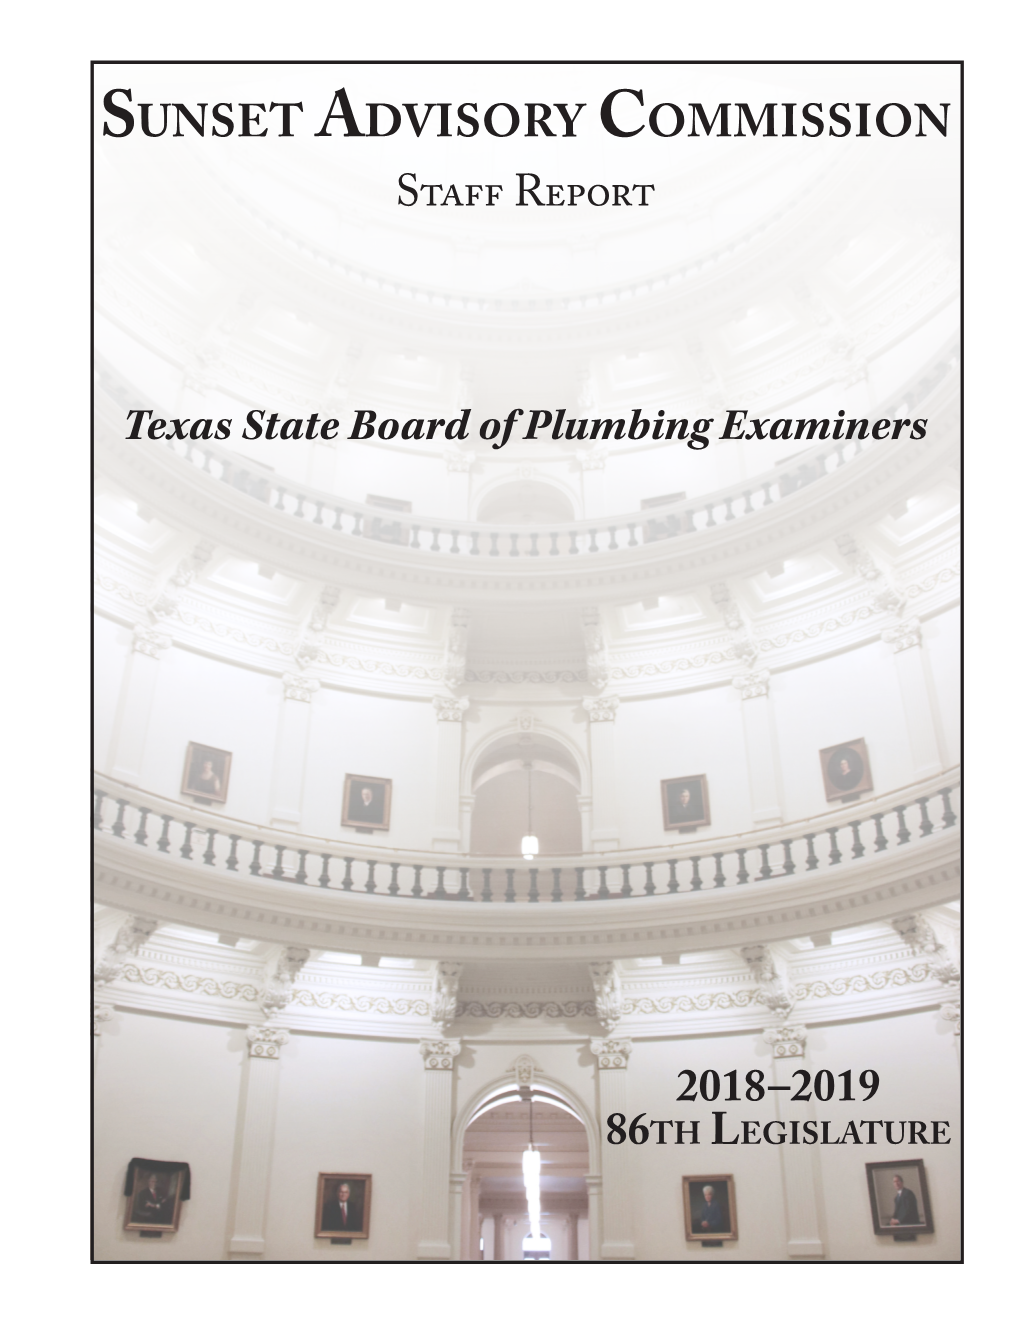 Texas State Board of Plumbing Examiners Staff Report Summary of Sunset Staff Recommendations 1 November 2018 Sunset Advisory Commission